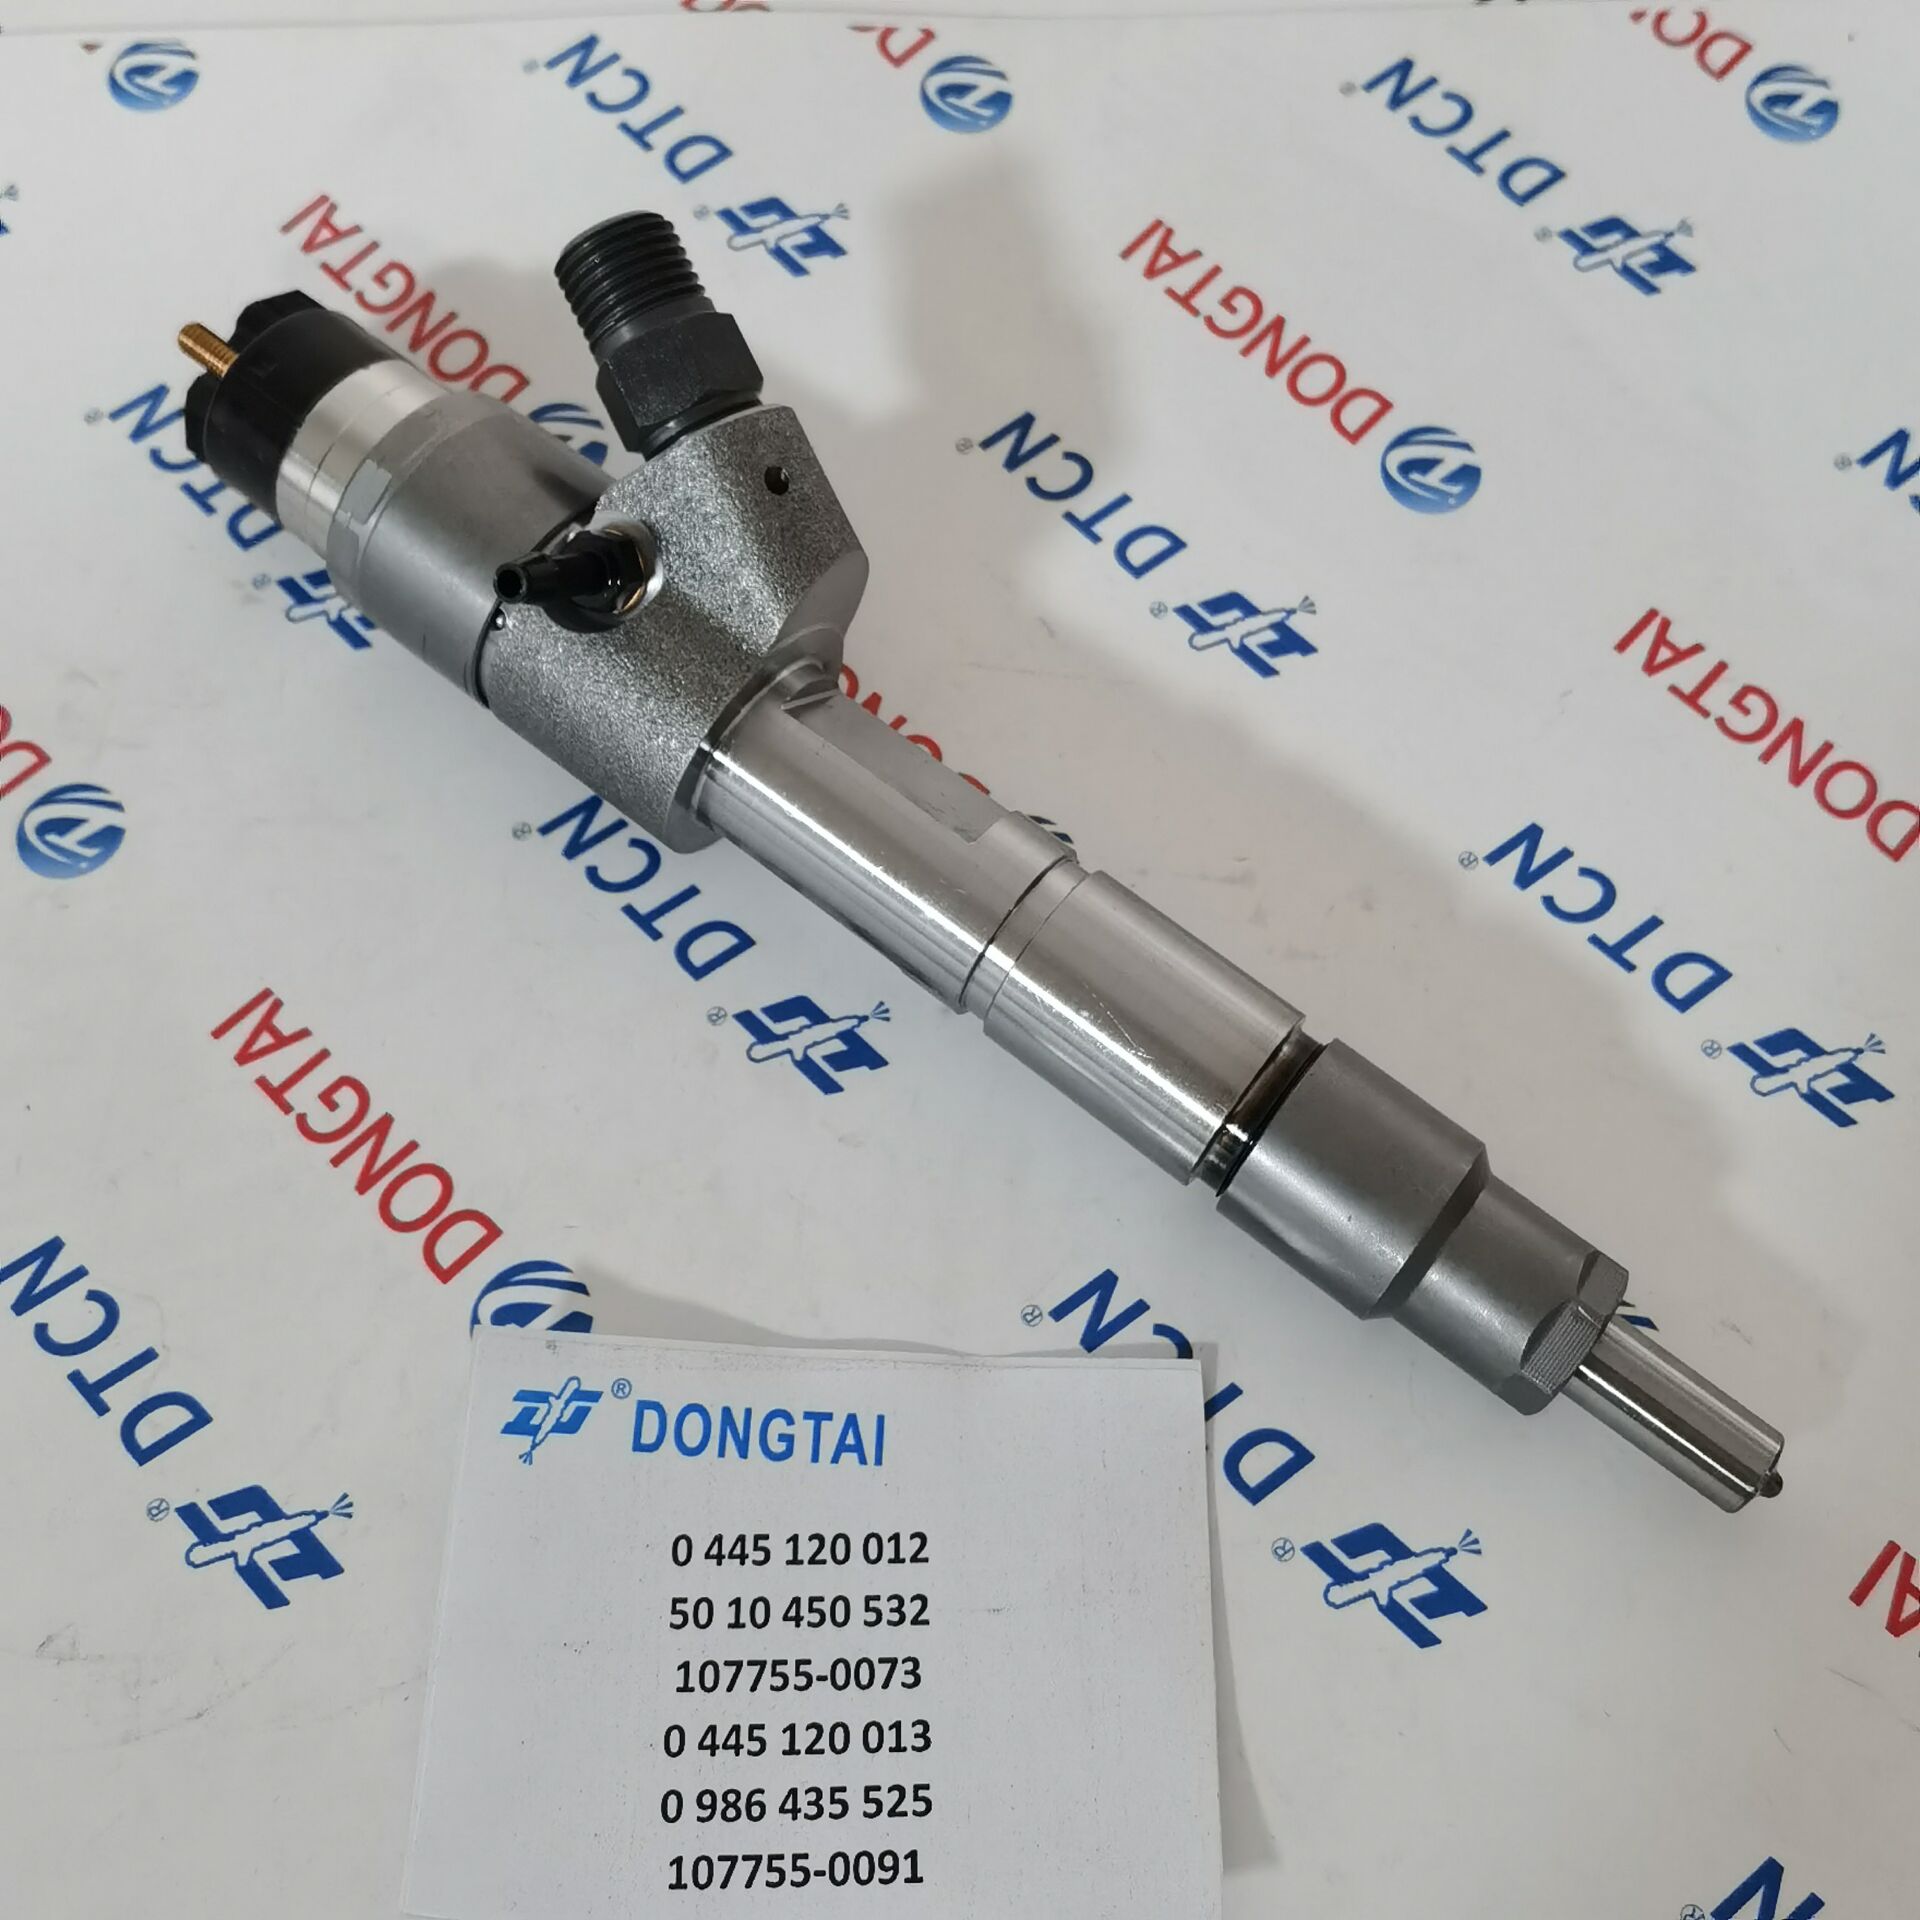 Factory Supply Diesel Fuel Tank Cleaning Tester - BOSCH Common Rail Injector 0 445 120 012 ,50 10 450 532,107755-0073=0 445 120 013 、 0 986 435 525 、107755-0091 – Dongtai